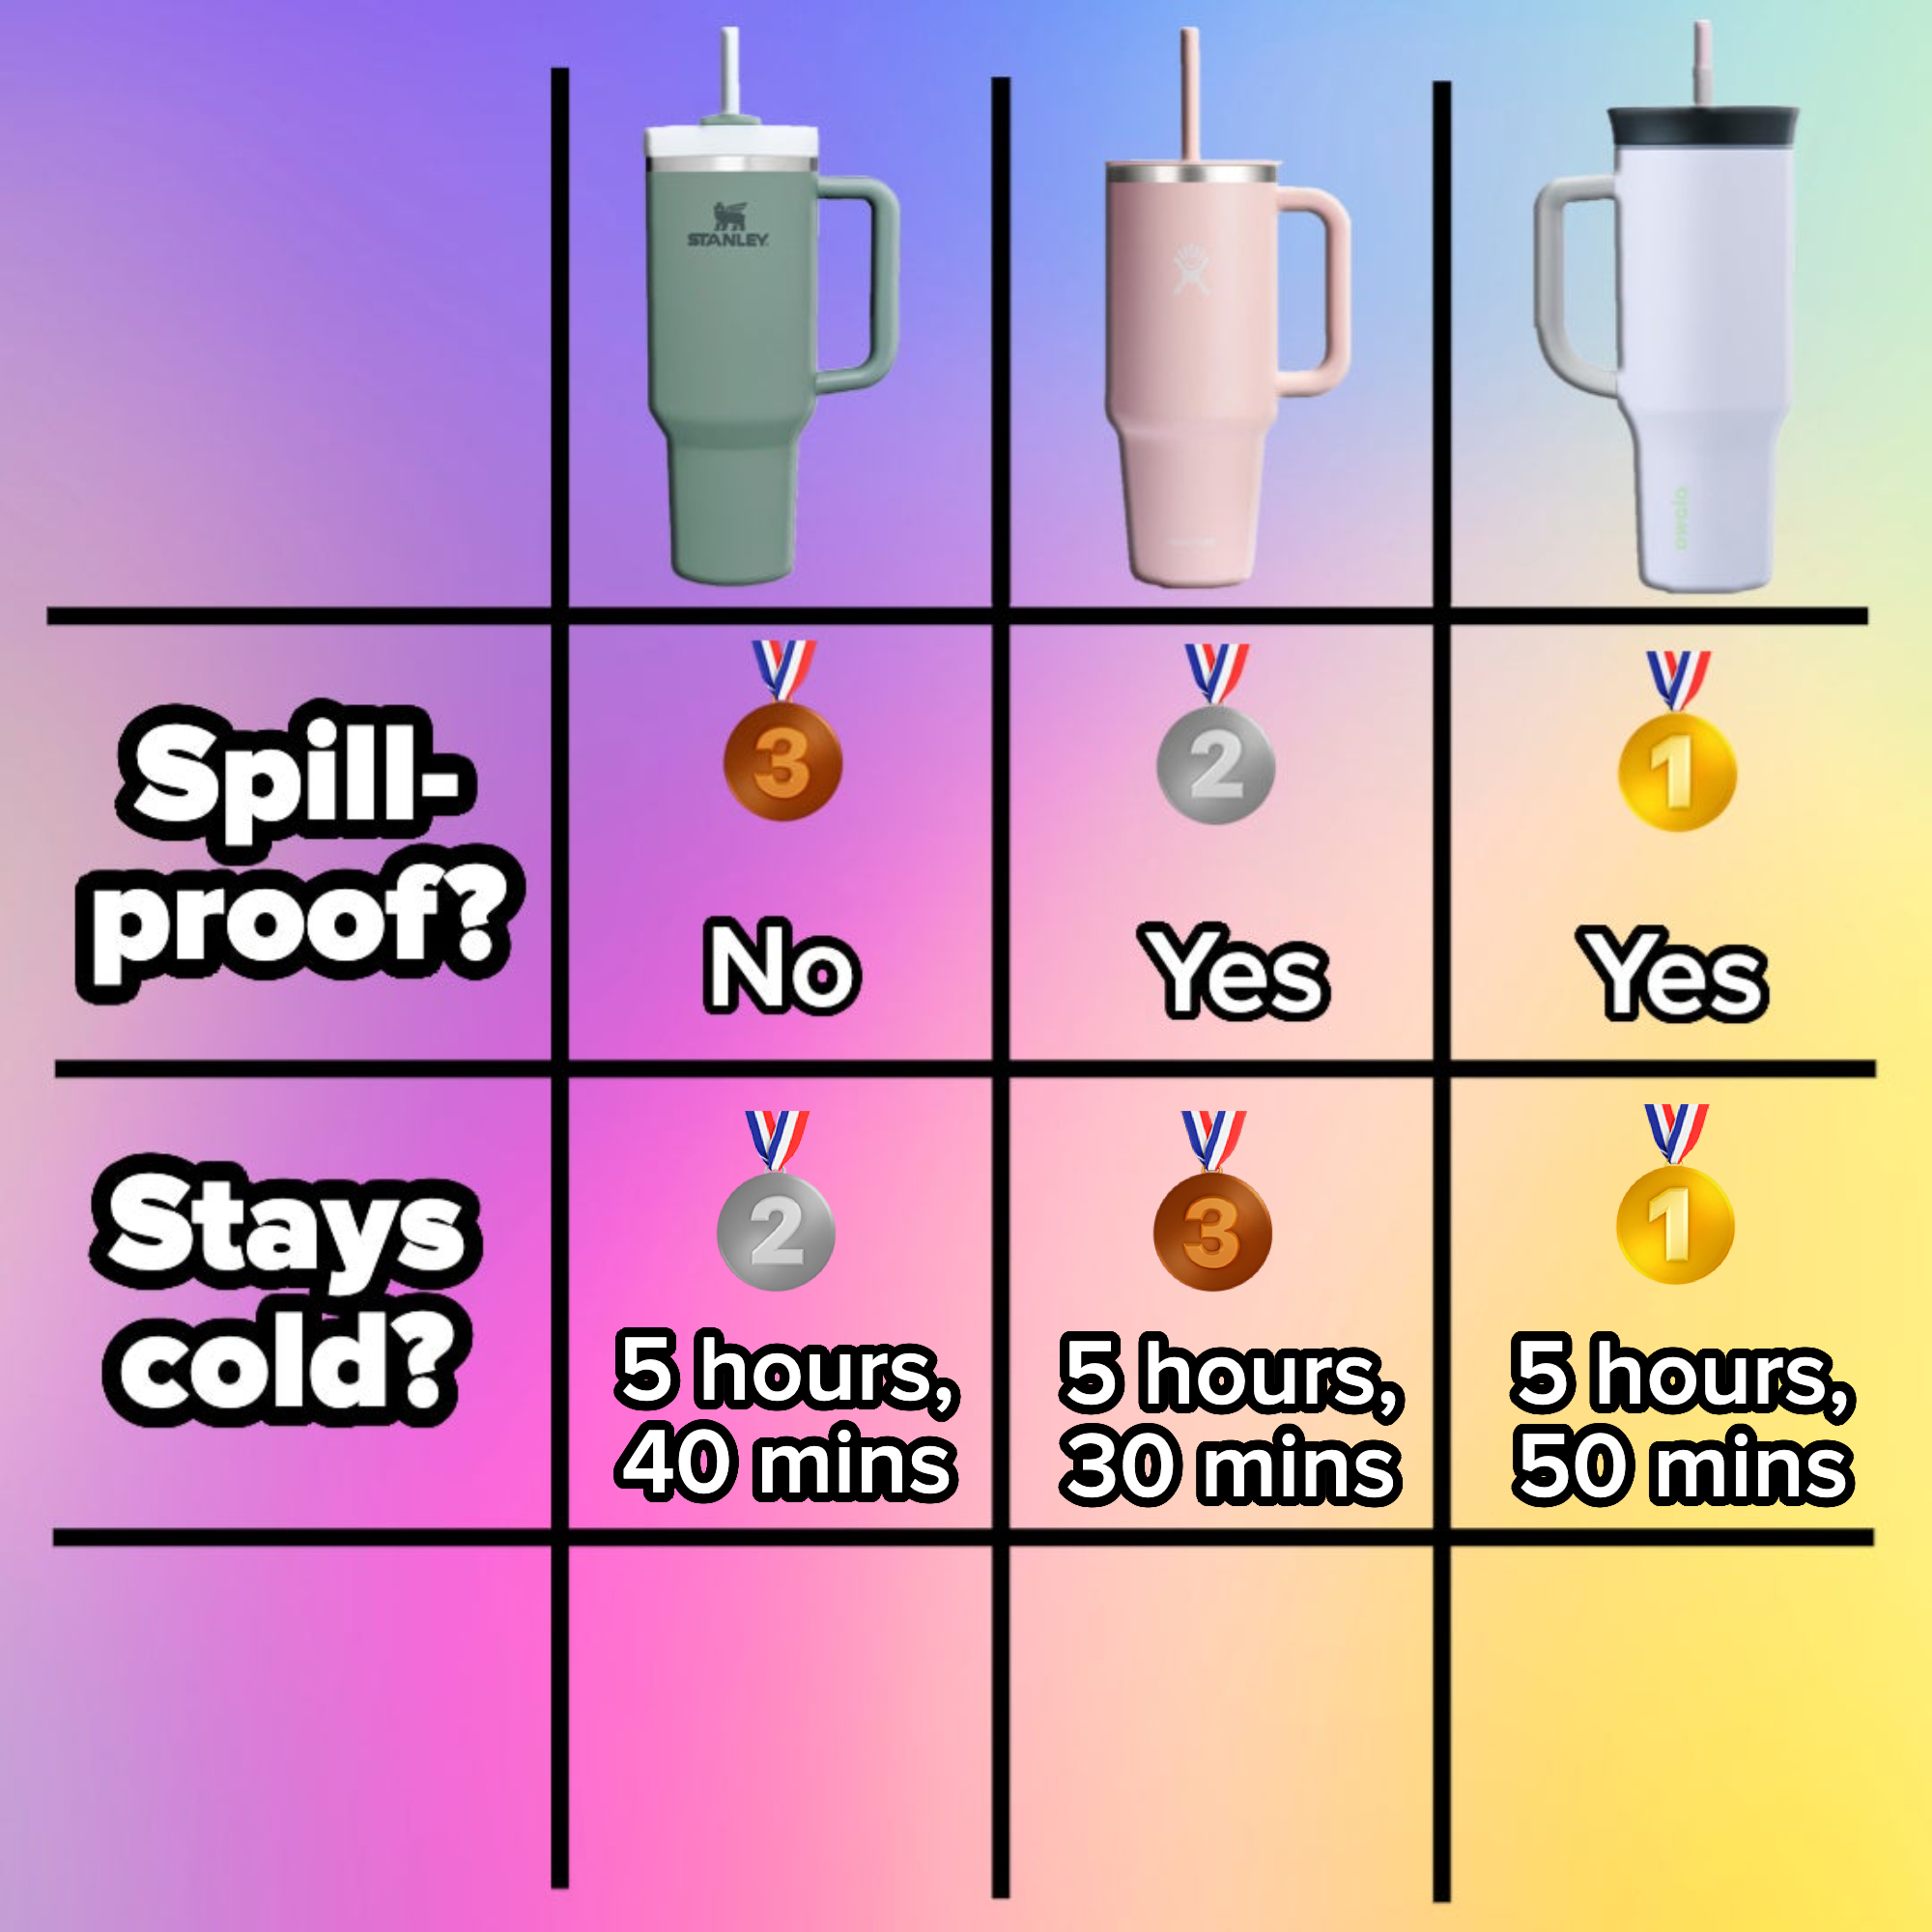 Results for the water bottles